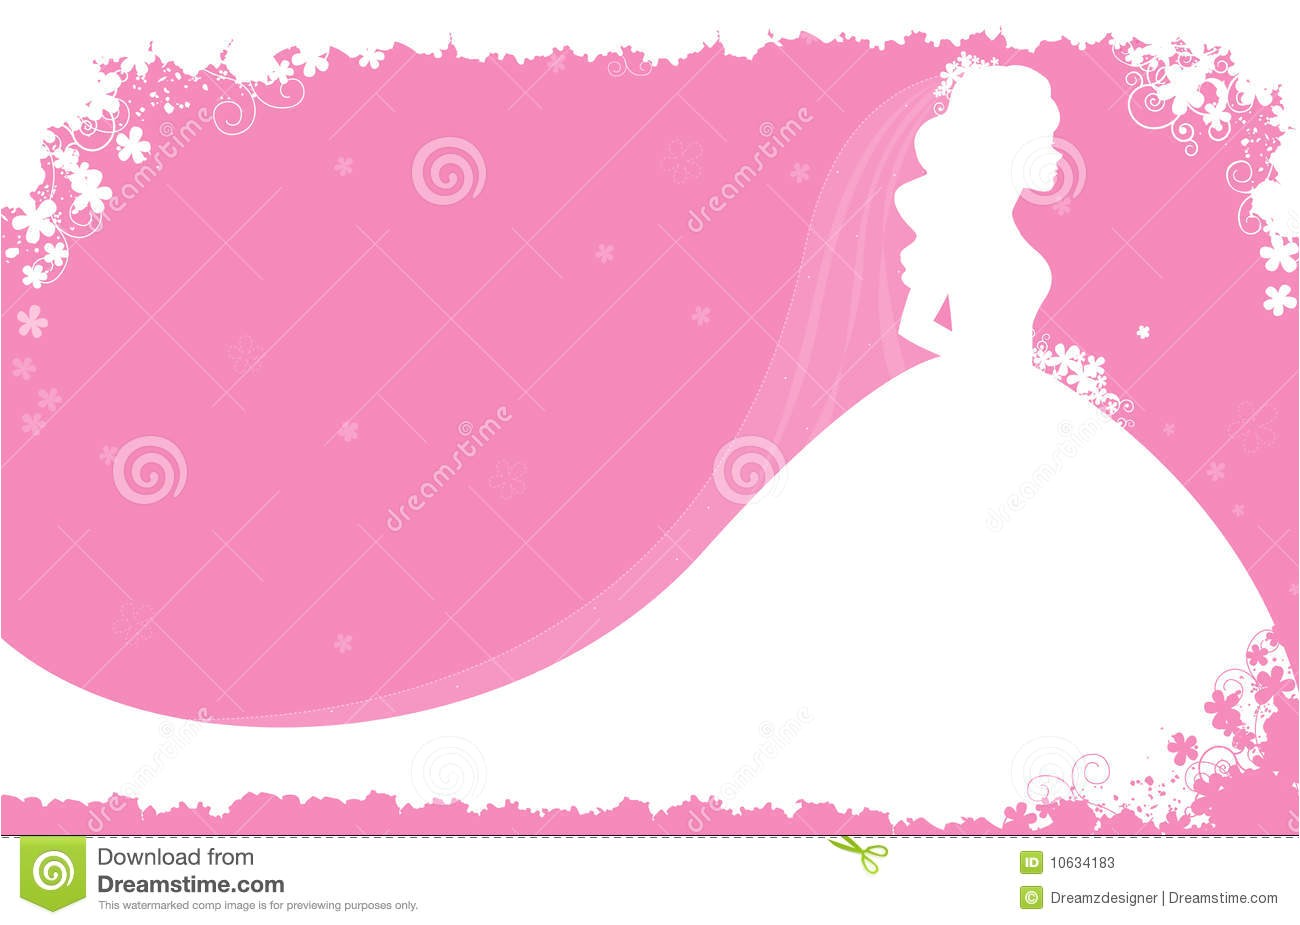 clipart for bridal shower invitations